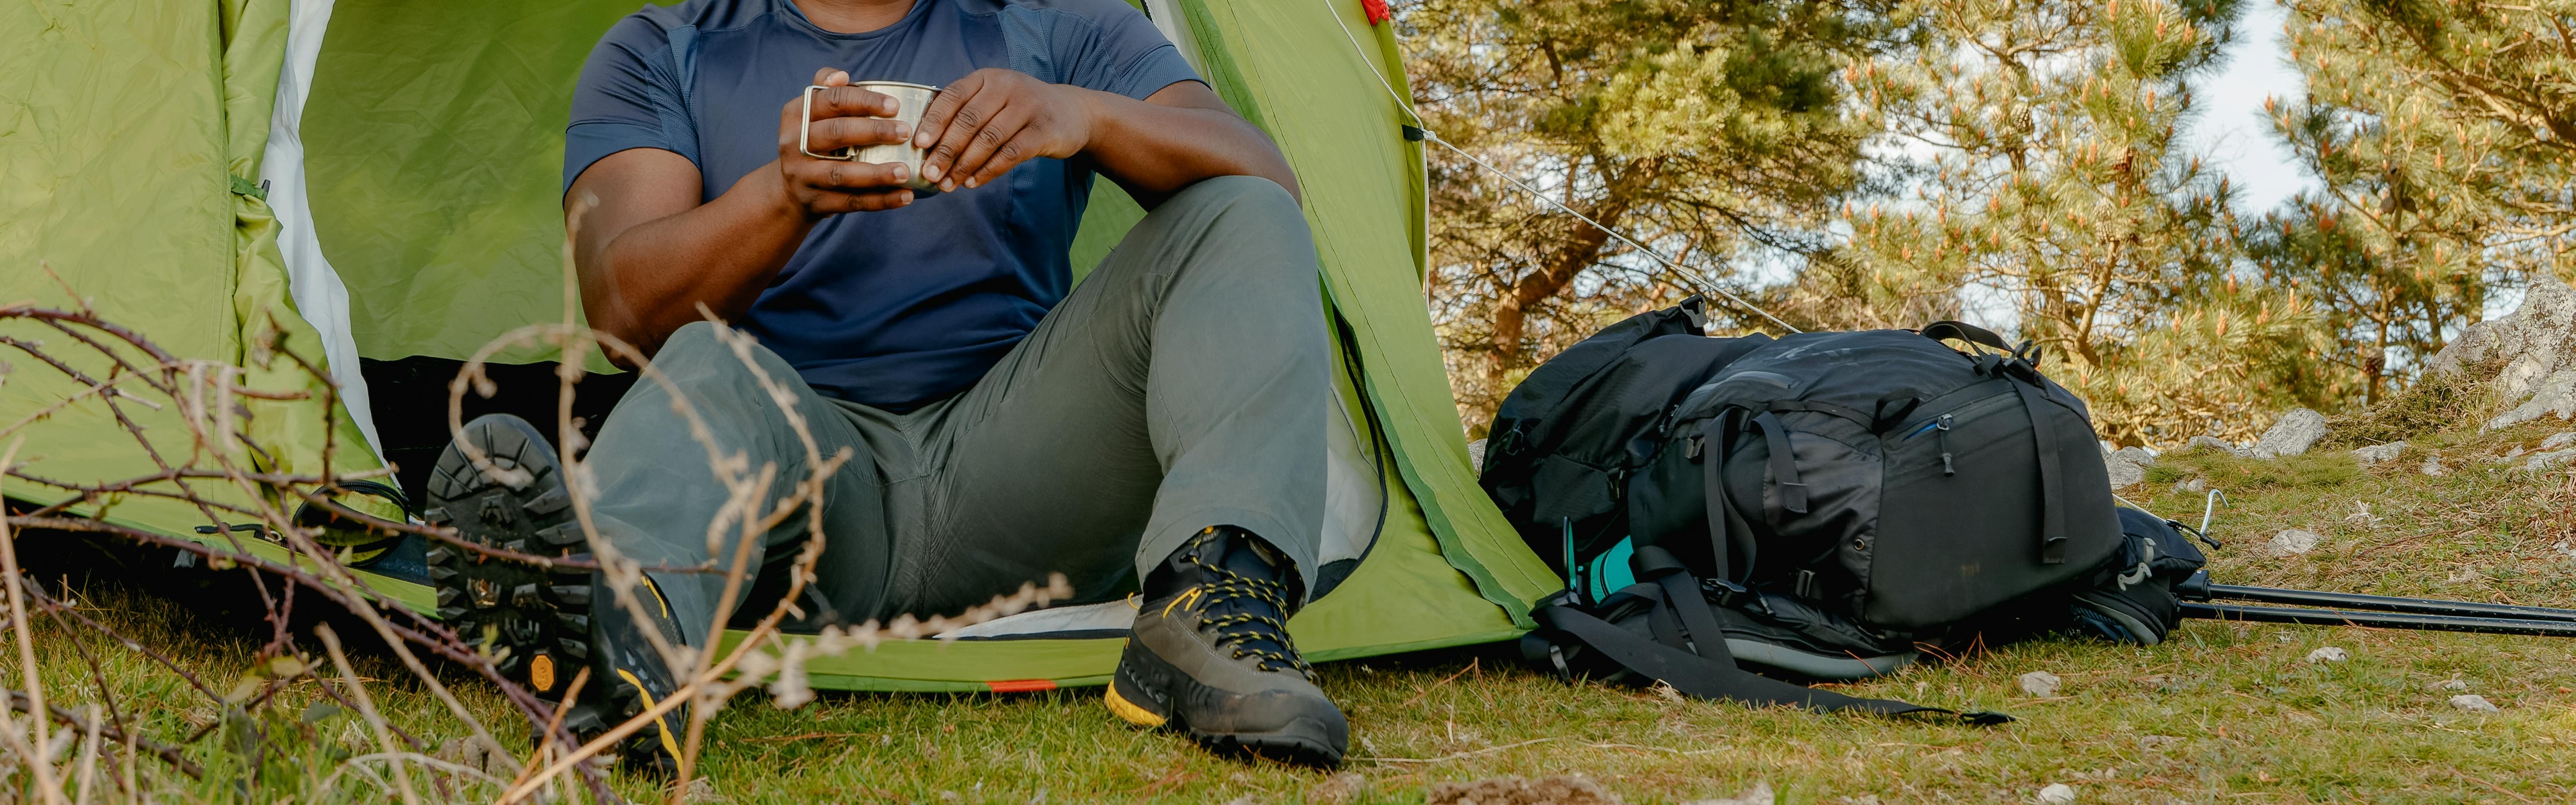 9 common mistakes to avoid while hiking and camping - Lonely Planet